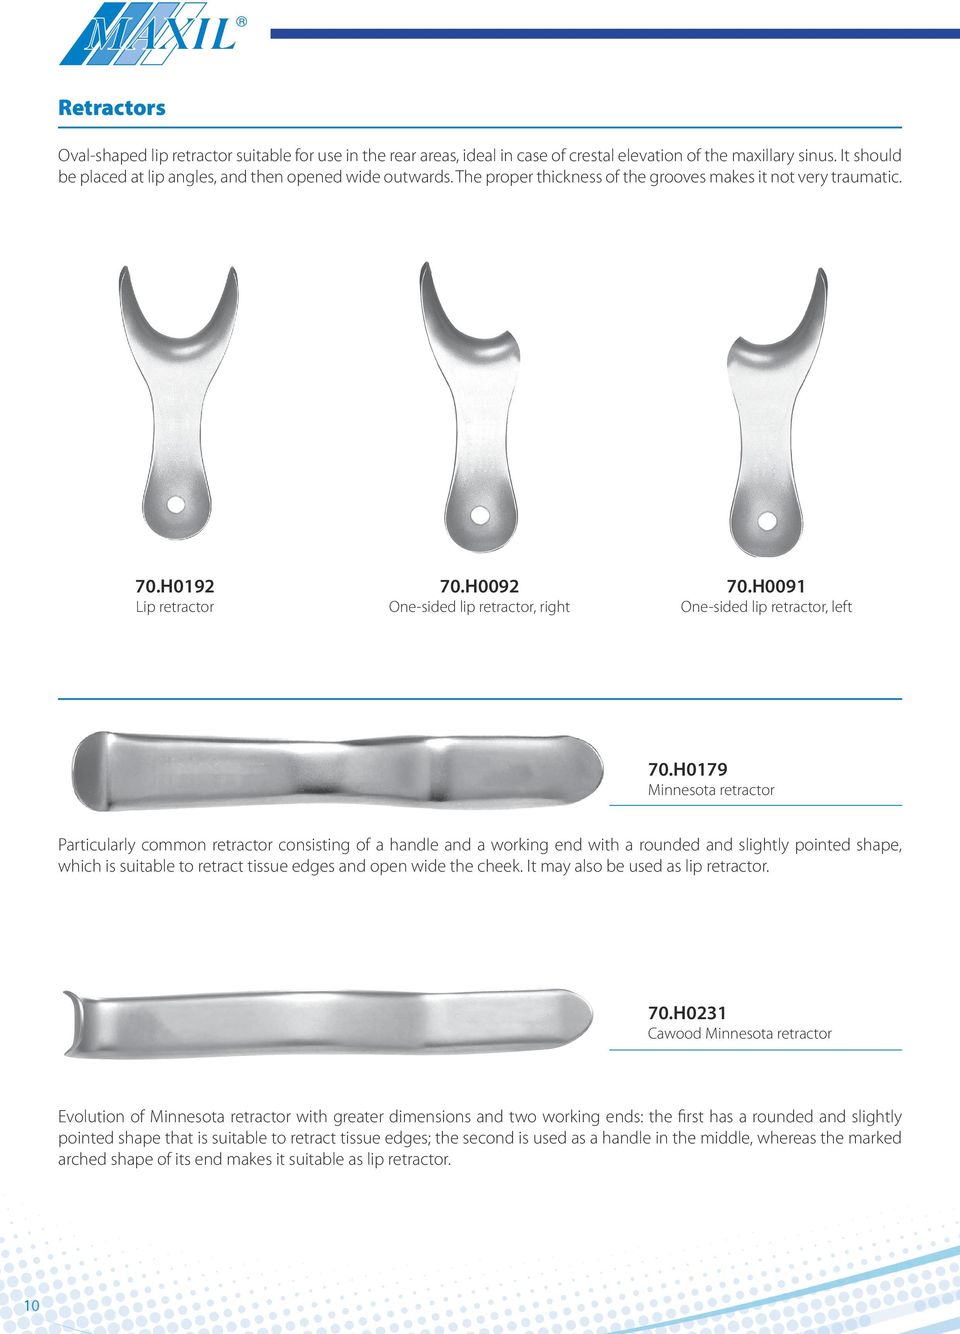 H0179 Minnesota retractor Particularly common retractor consisting of a handle and a working end with a rounded and slightly pointed shape, which is suitable to retract tissue edges and open wide the